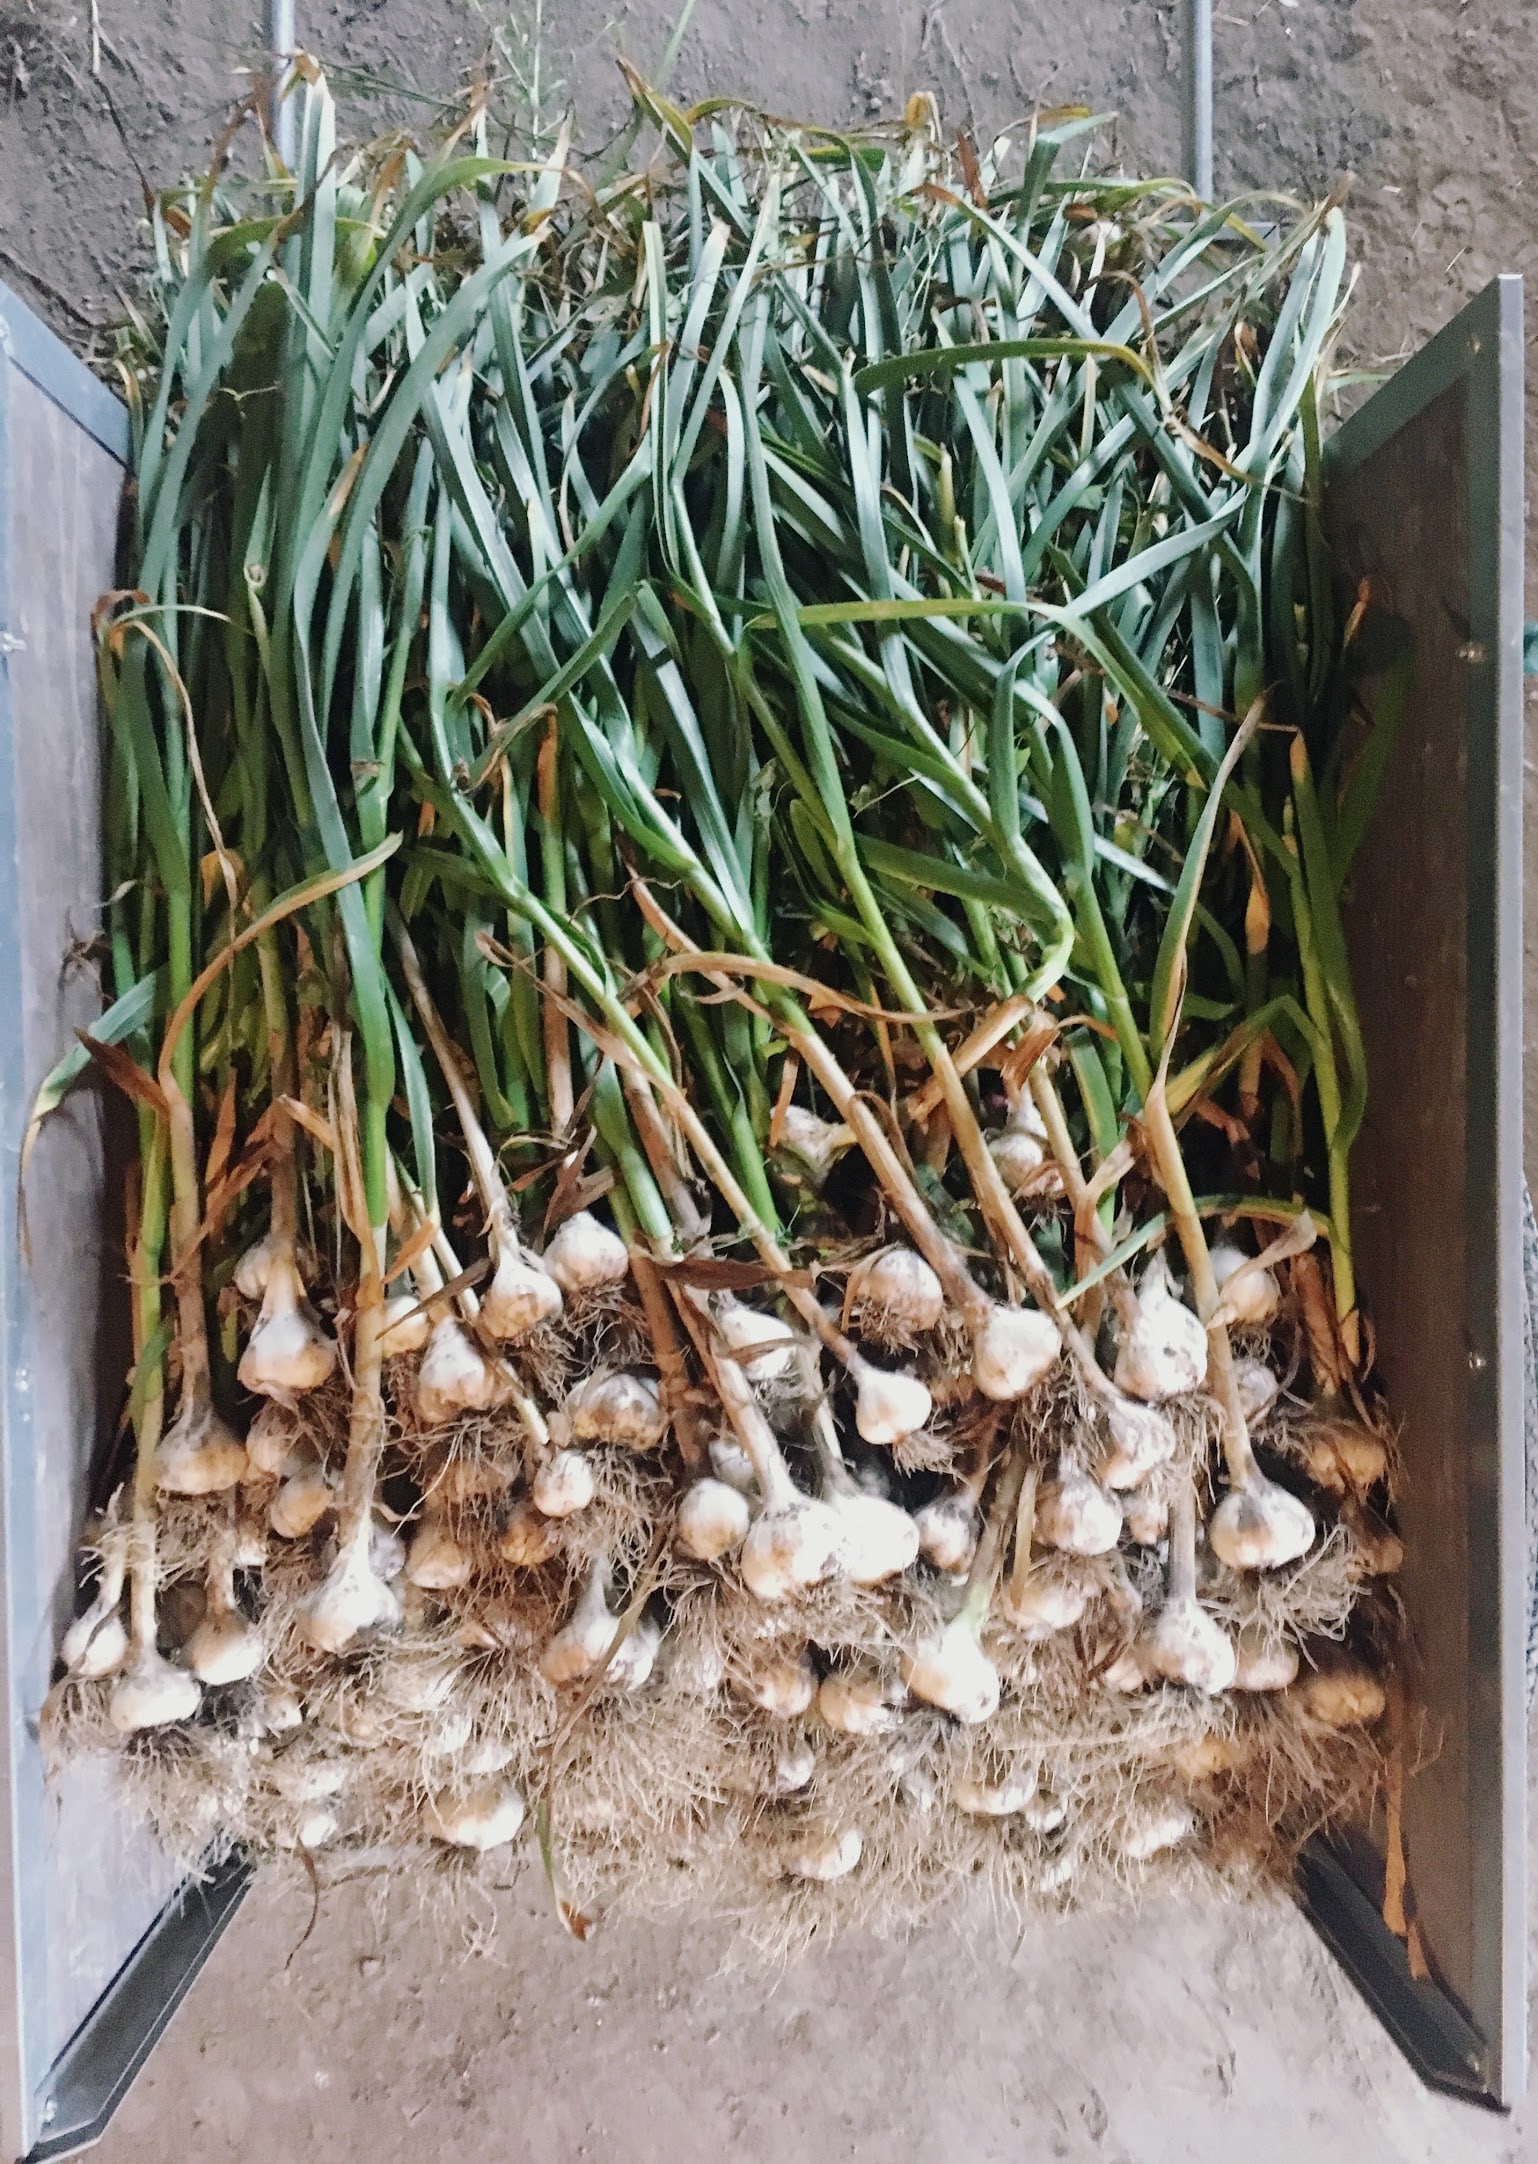 Cart o Garlic - Plant, Weed, Harvest, Eat. And Repeat.